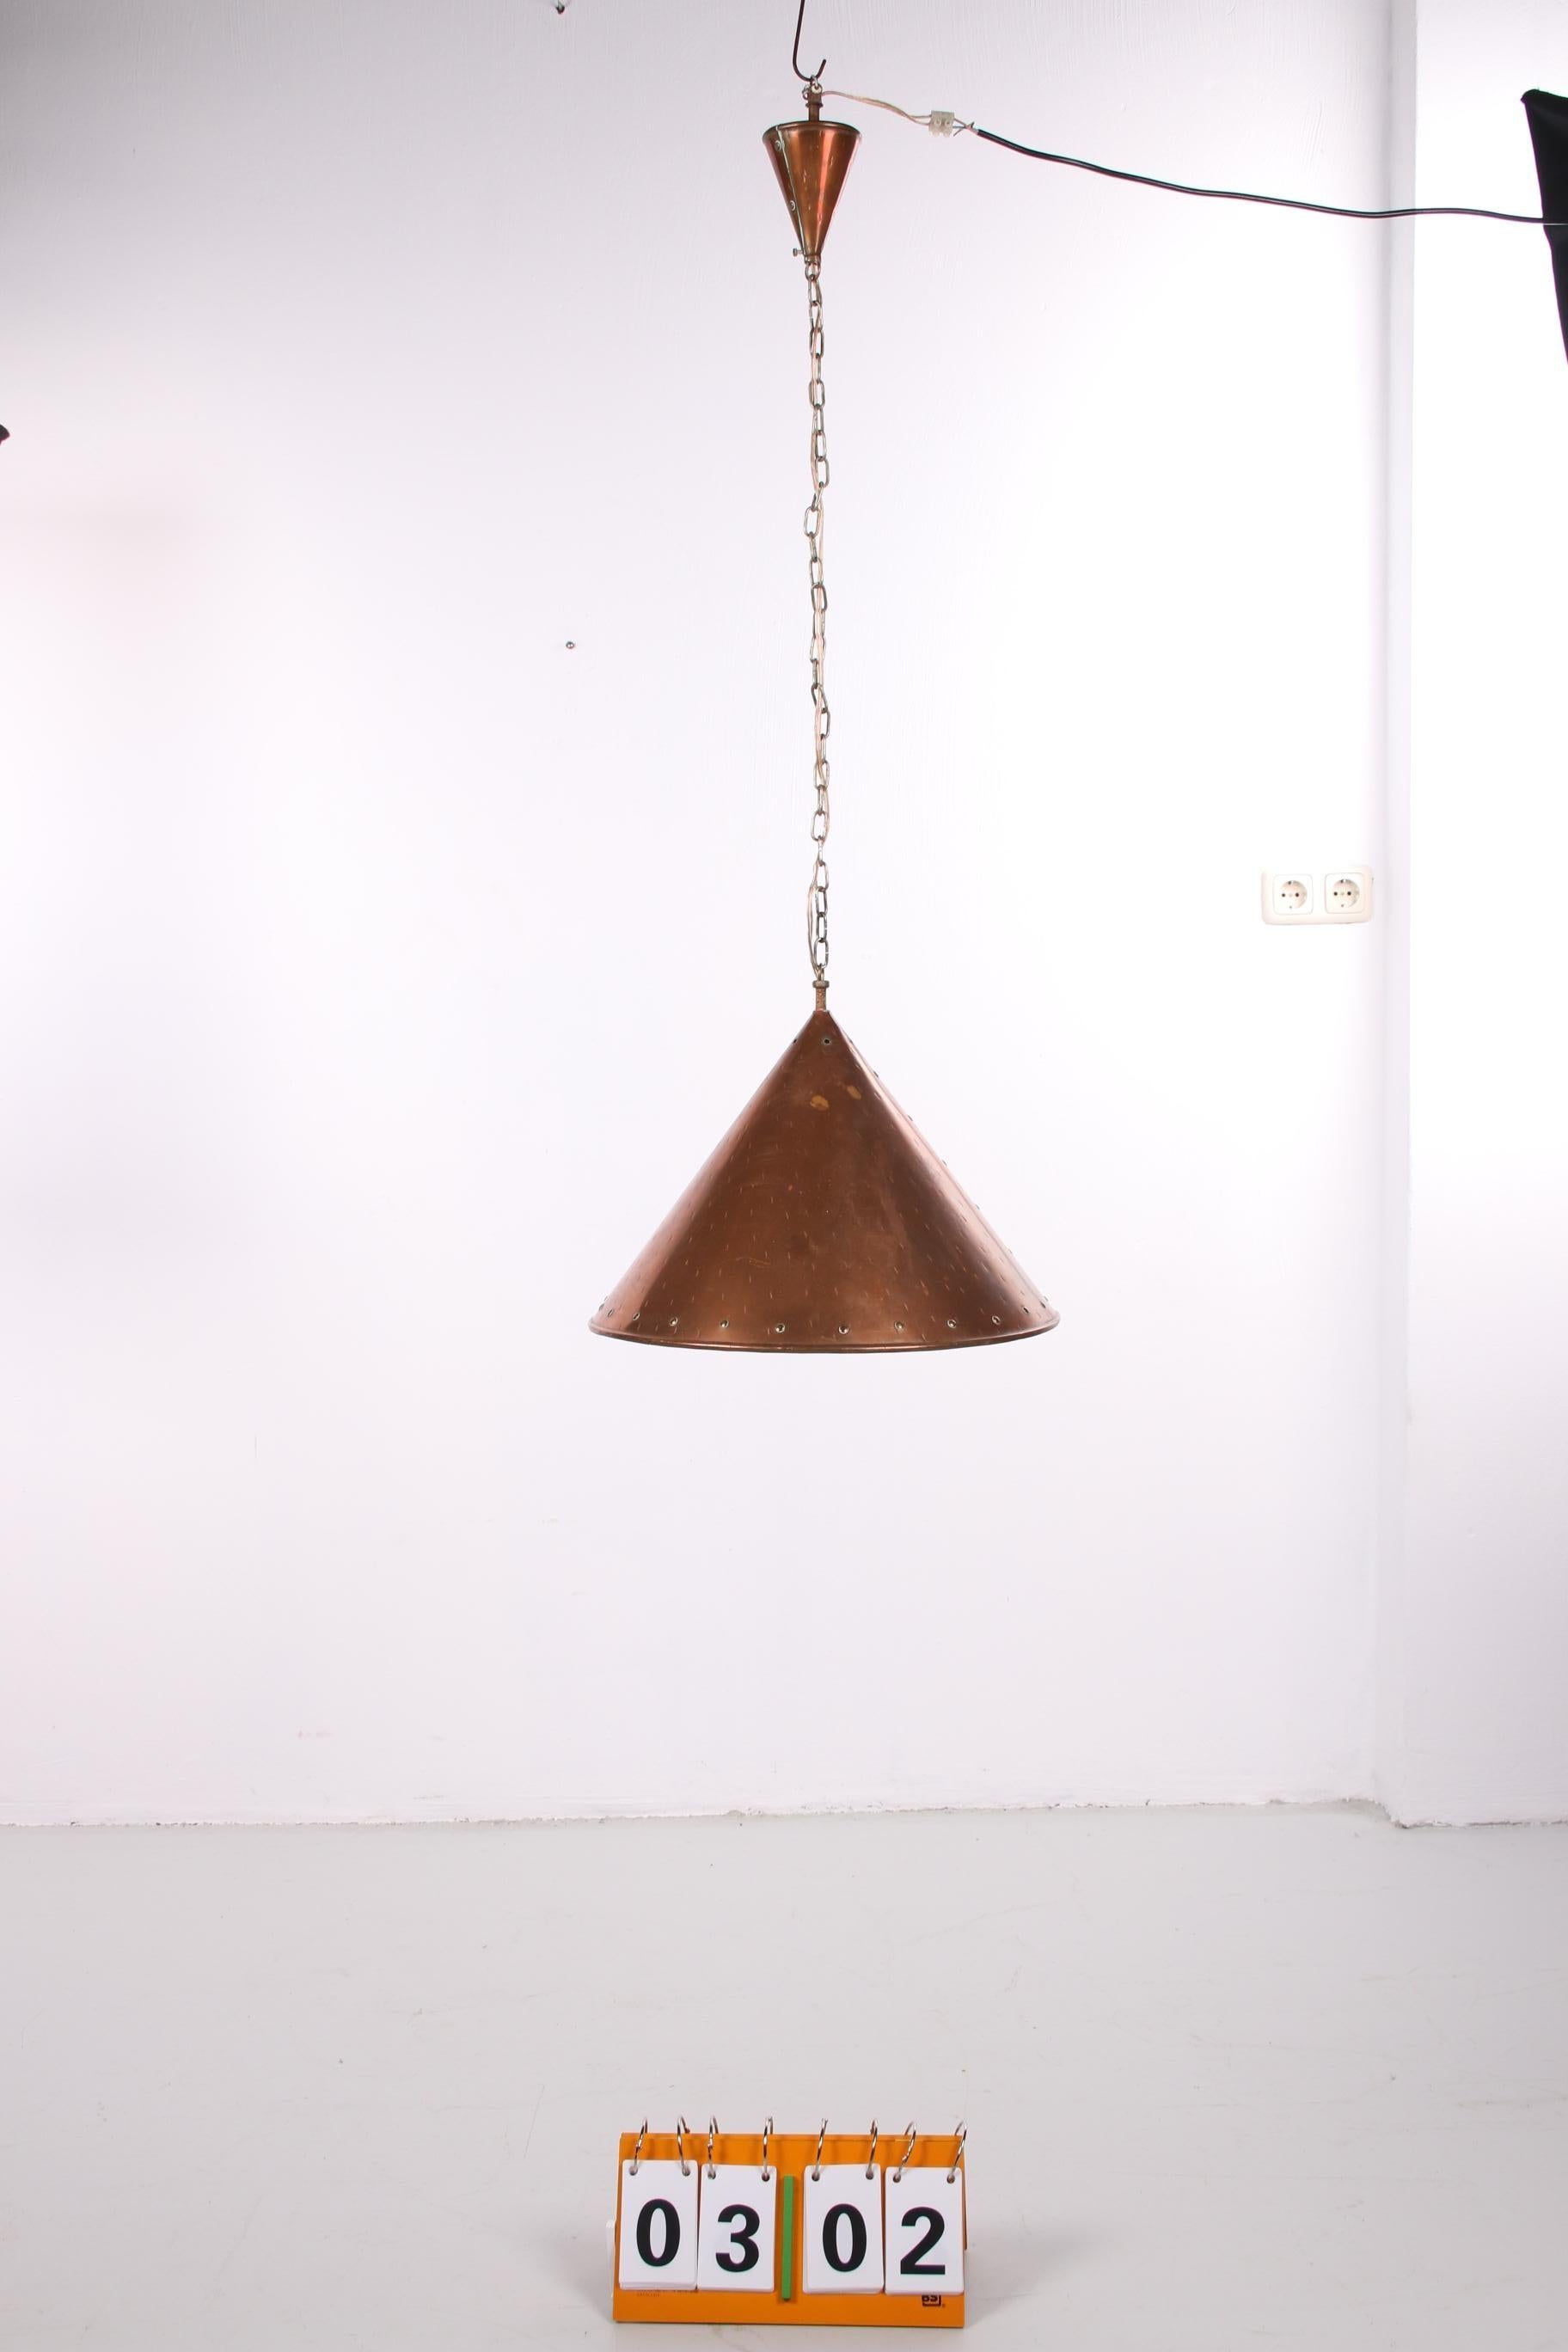 Danish Hand Hammered Copper Pendant Lamps by ES Horn Aalestrup, 1950s For Sale 2